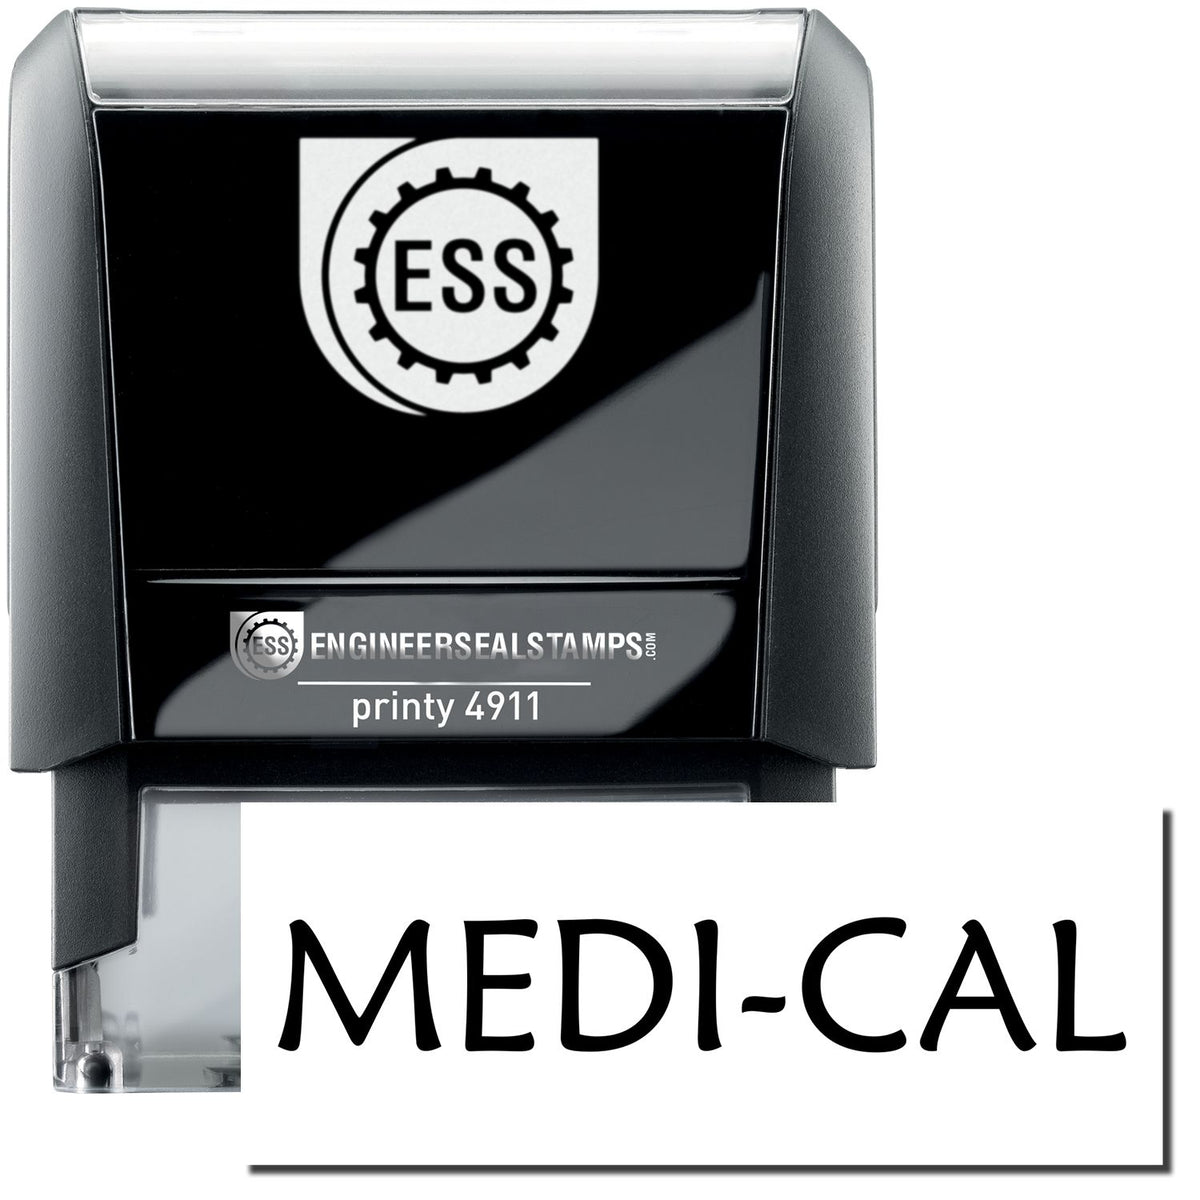 A self-inking stamp with a stamped image showing how the text &quot;MEDI-CAL&quot; is displayed after stamping.